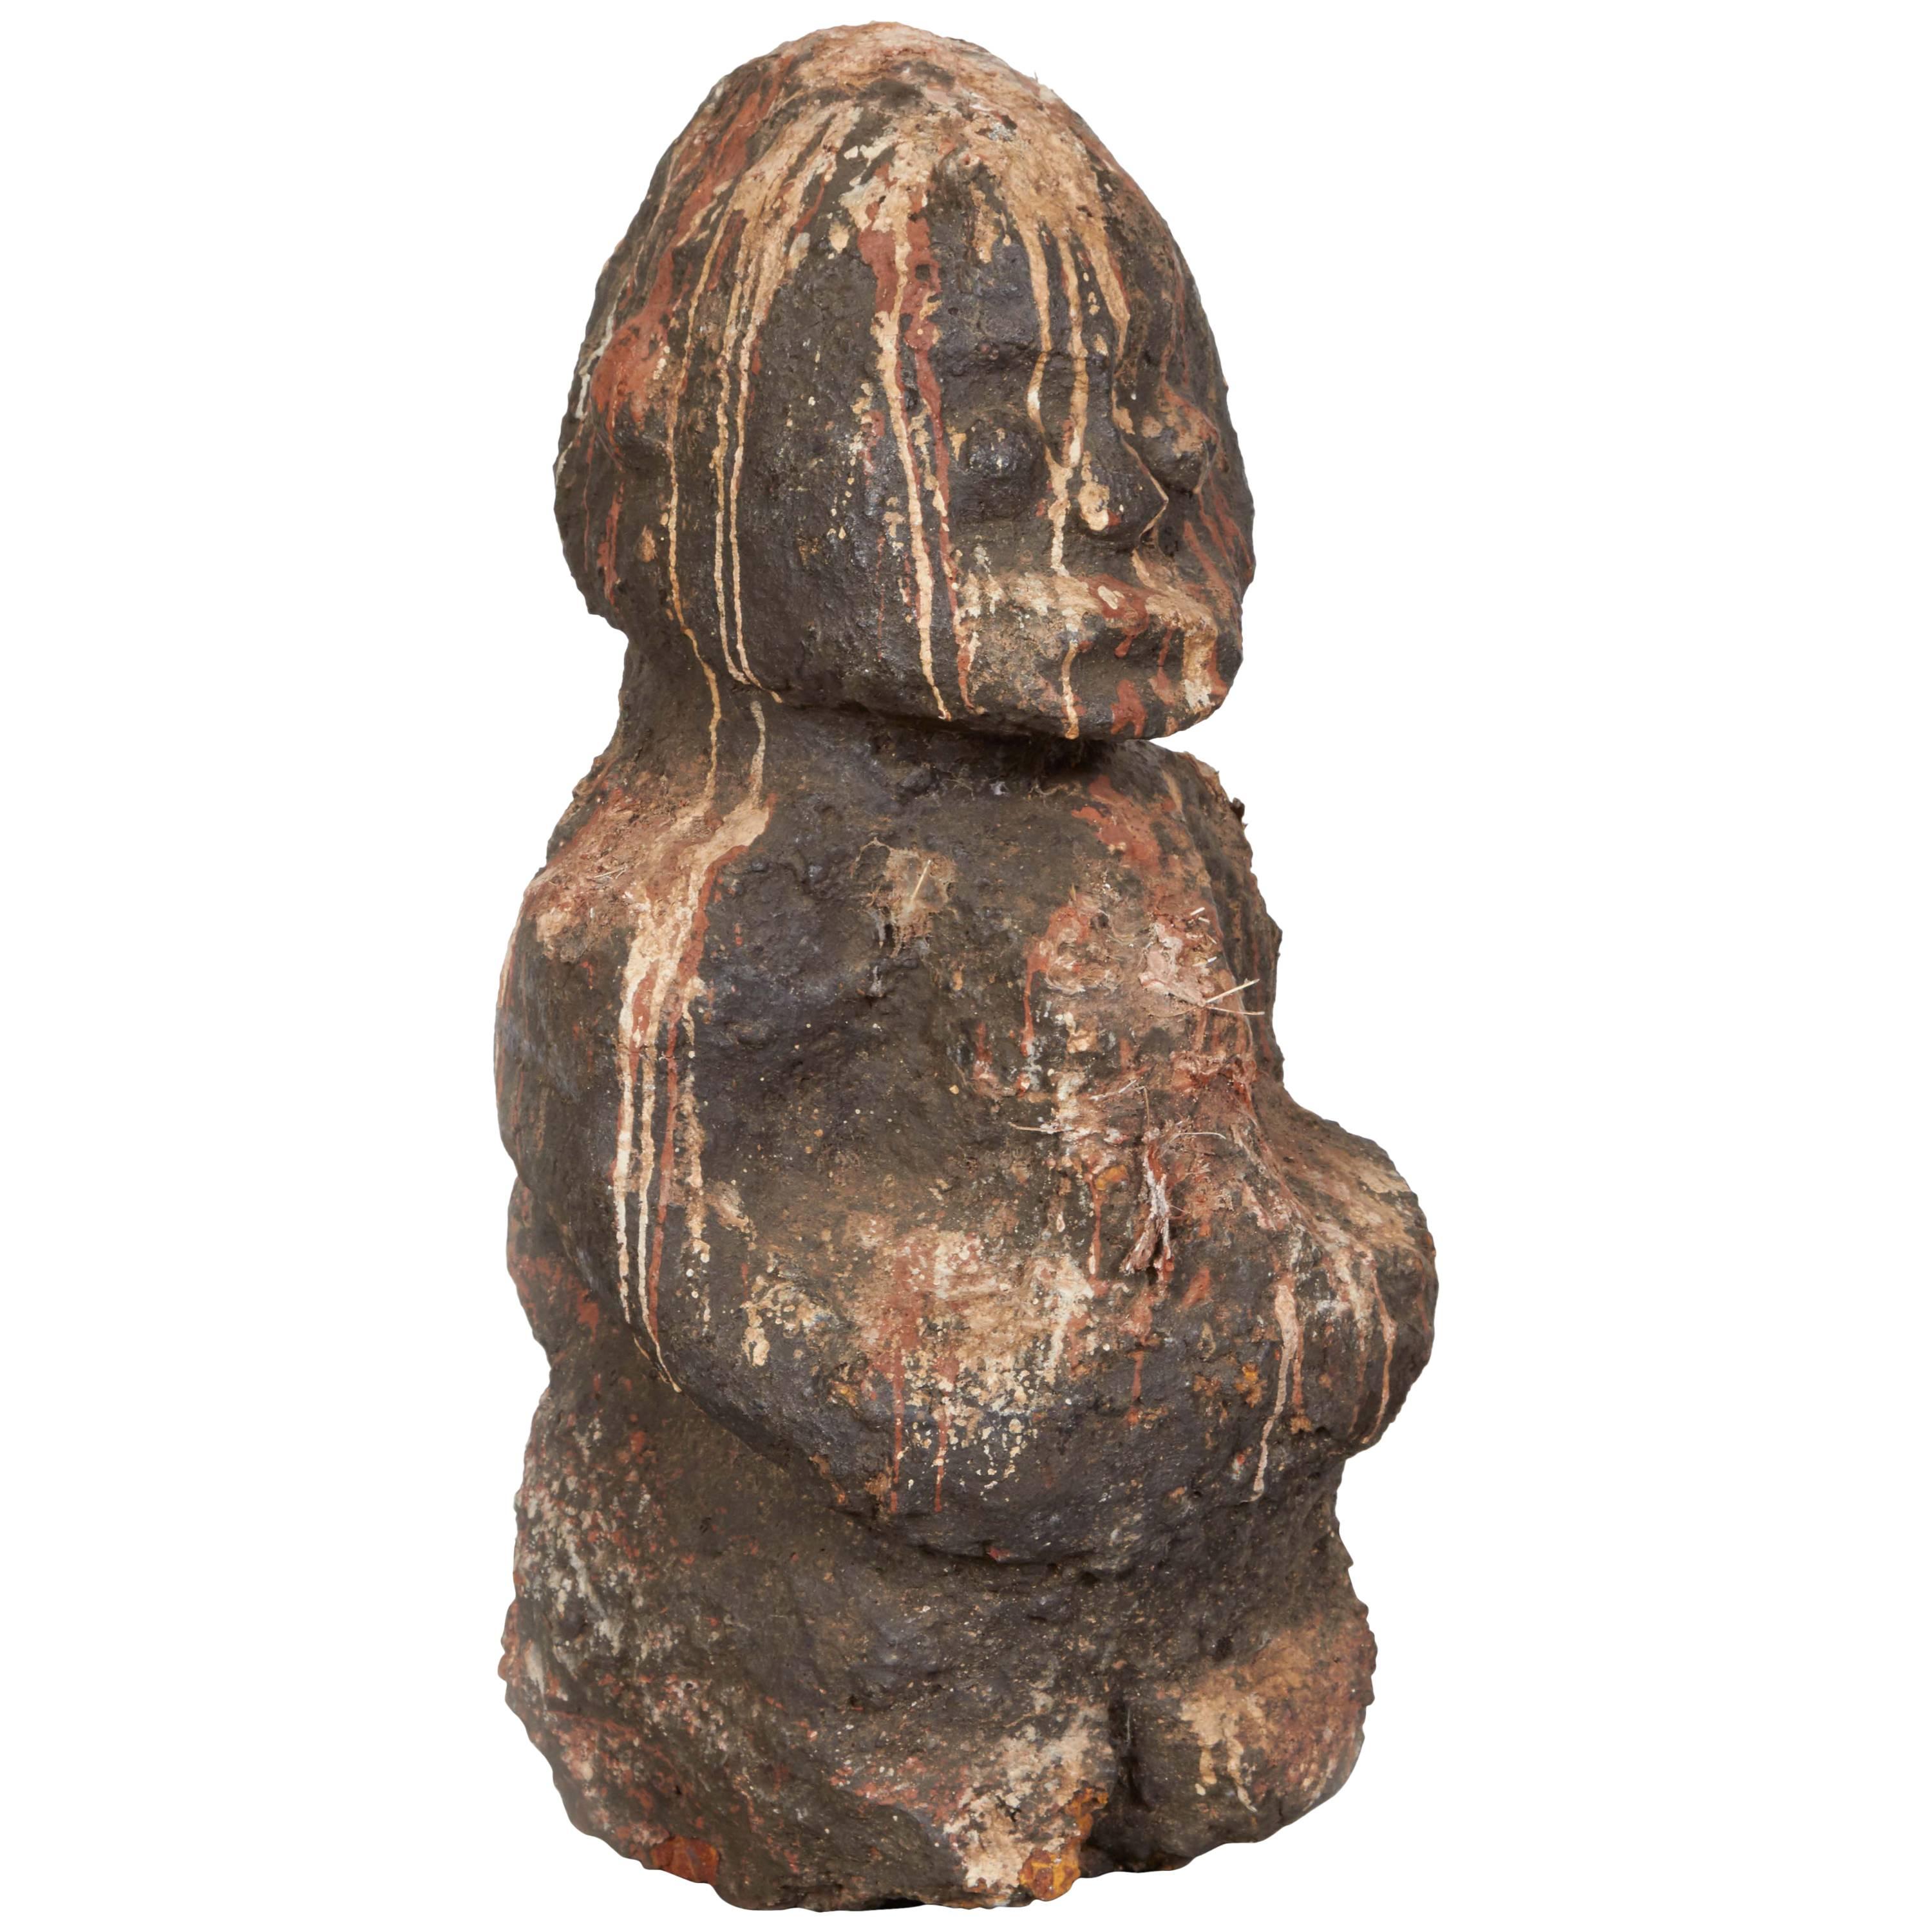 West African Stone Shrine Figure Sculpture, Great Patina And Texture